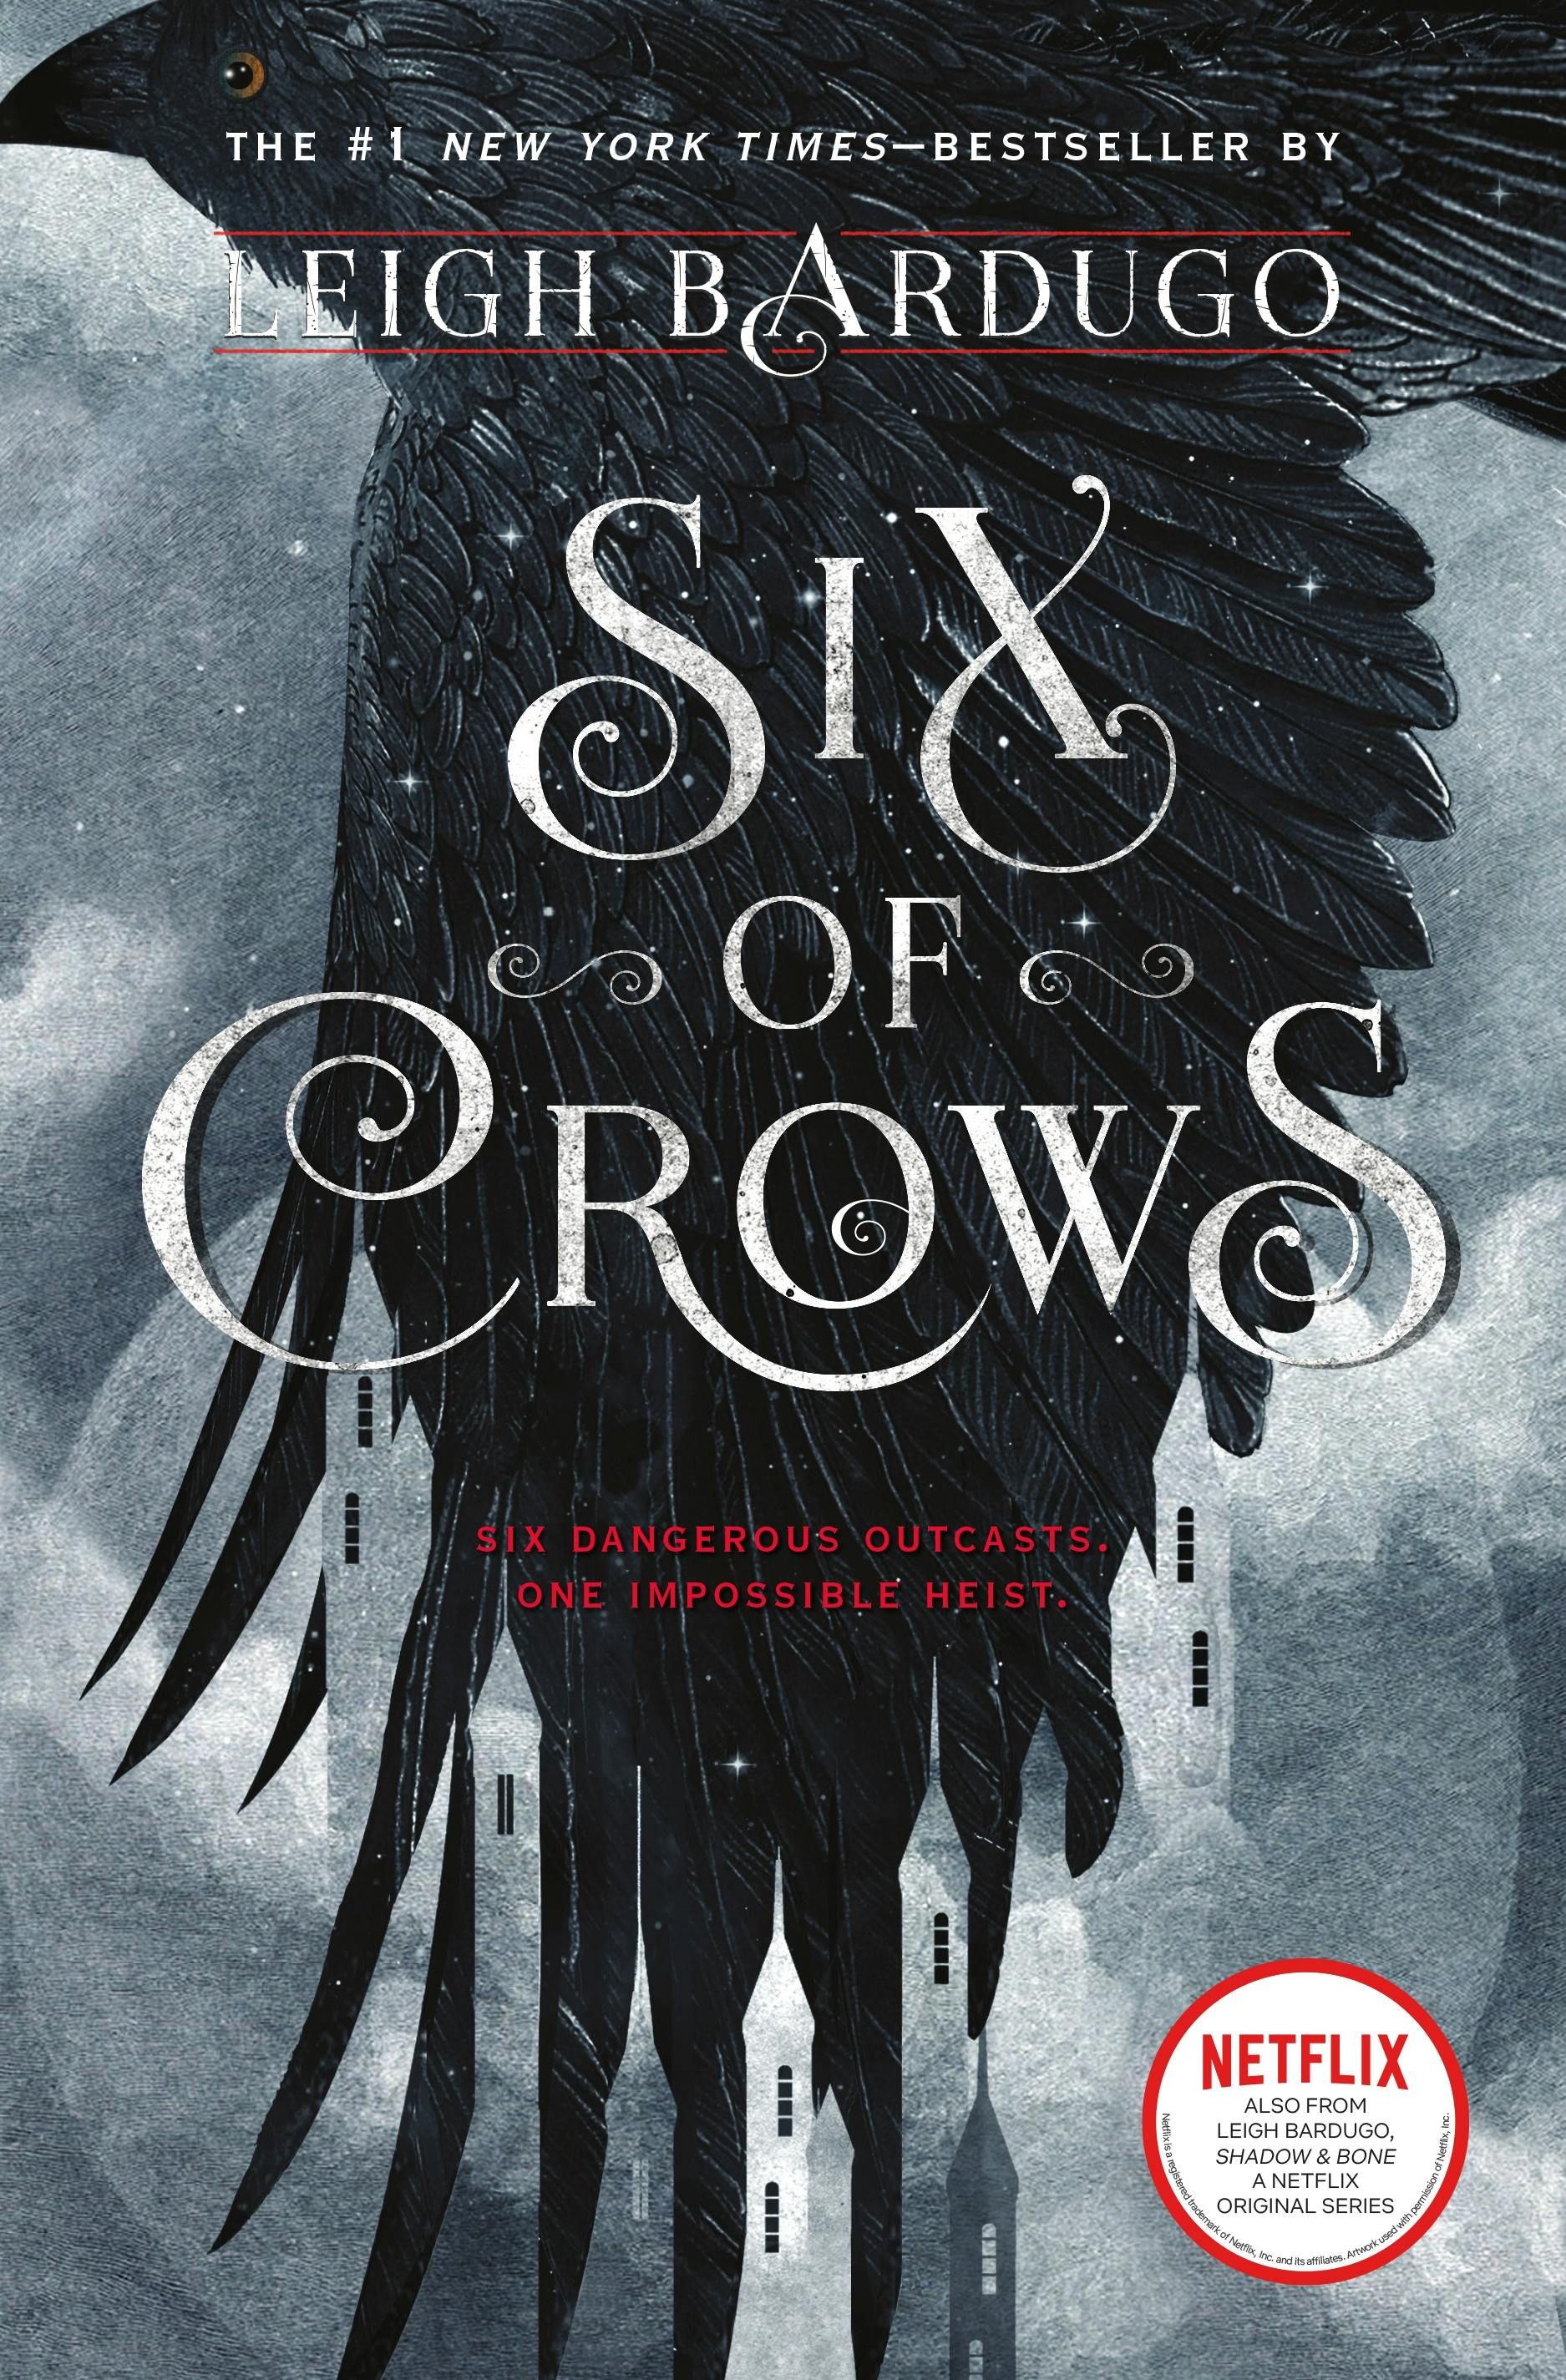 Book cover “Six of Crows”